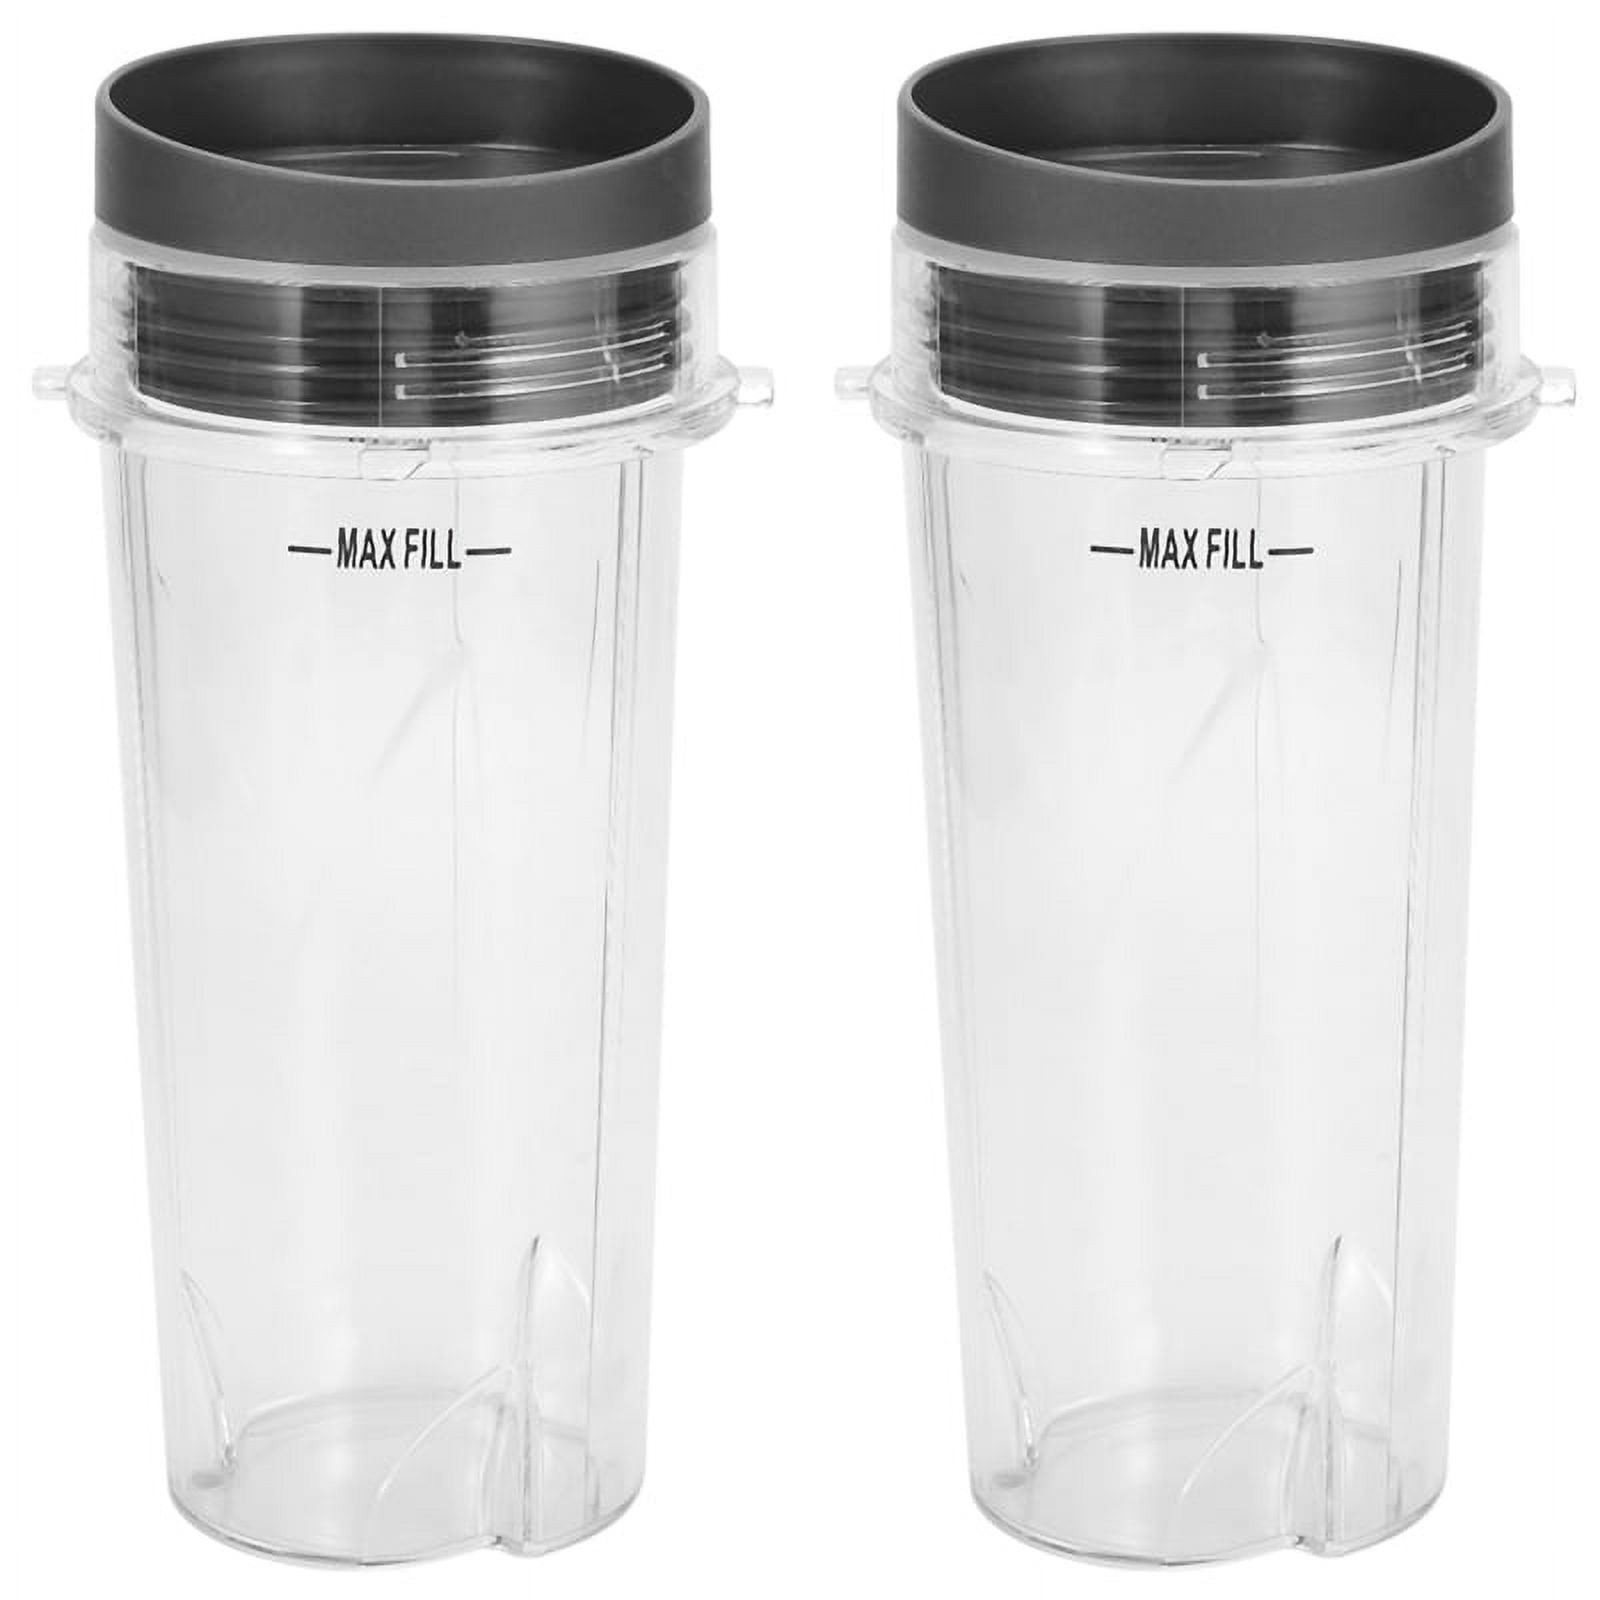 Enbizio Replacement Part for Ninja Blender Cups Single Serve 16 Ounce Cup Set with 2 Sip Lids for BL770 BL780 BL660 Professional (2 Pack)